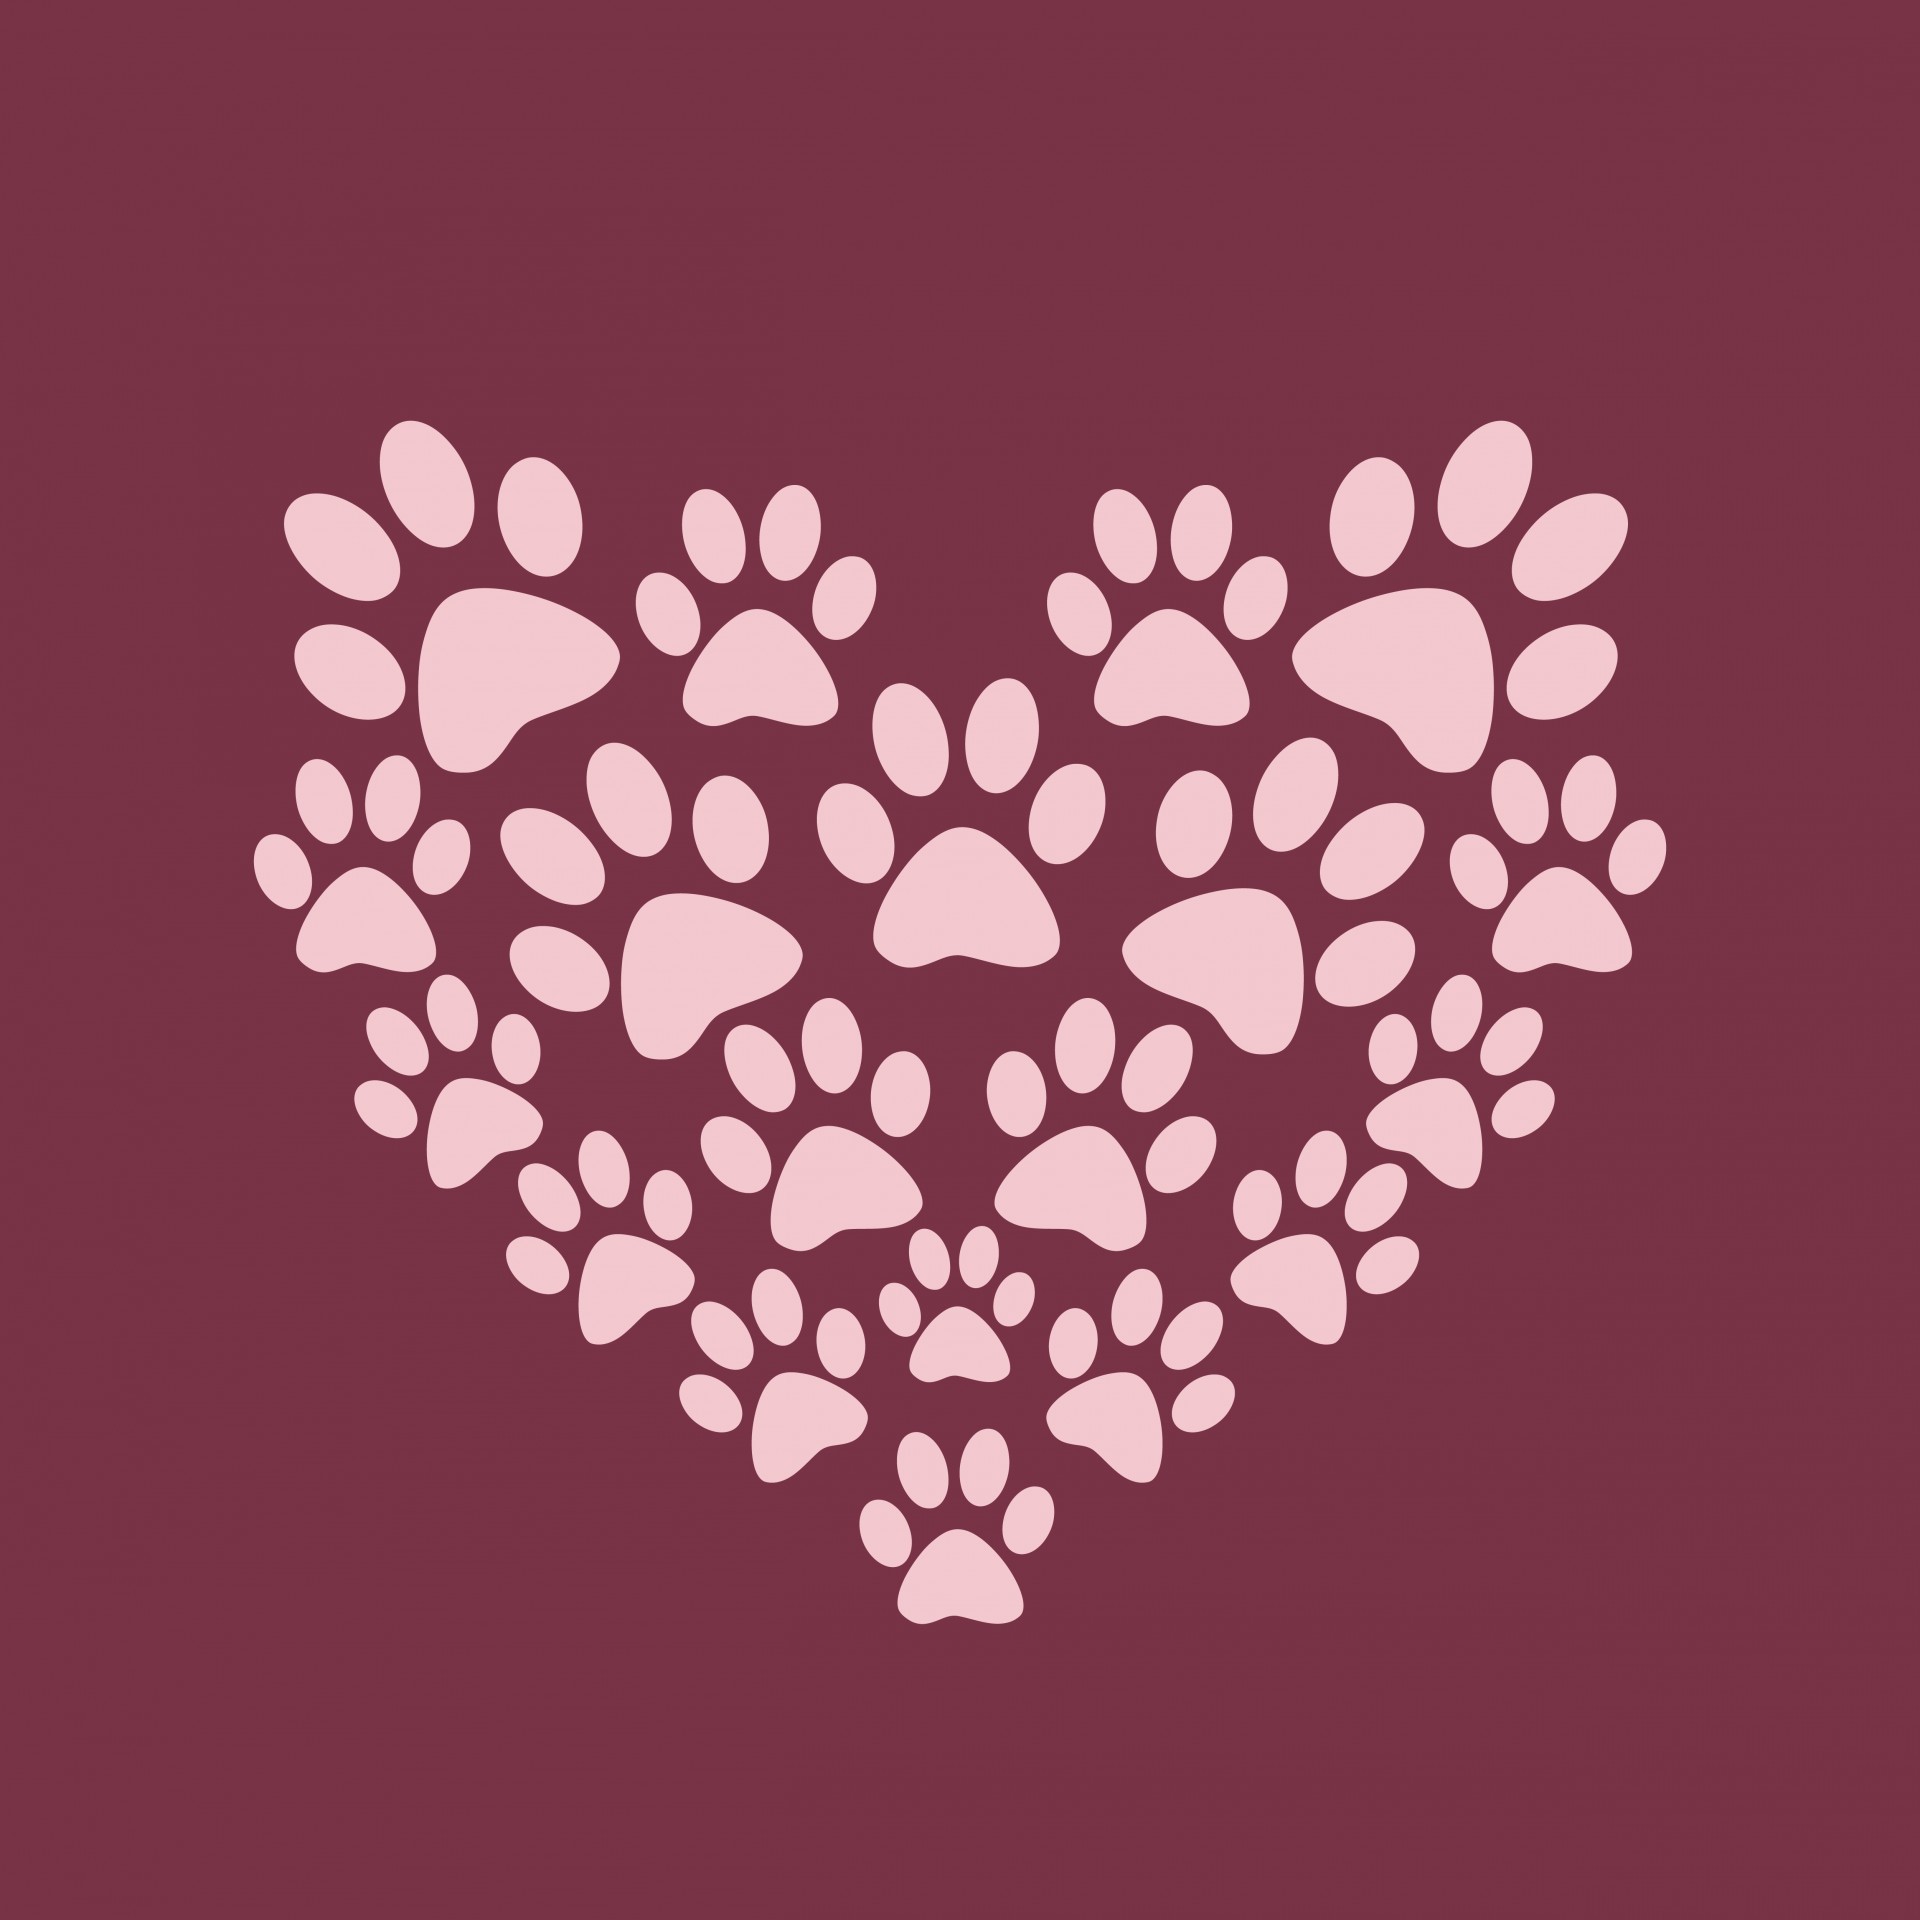 1920x1920 ... Wallpaper The Dog's Paw Heart Paw Print Background ...